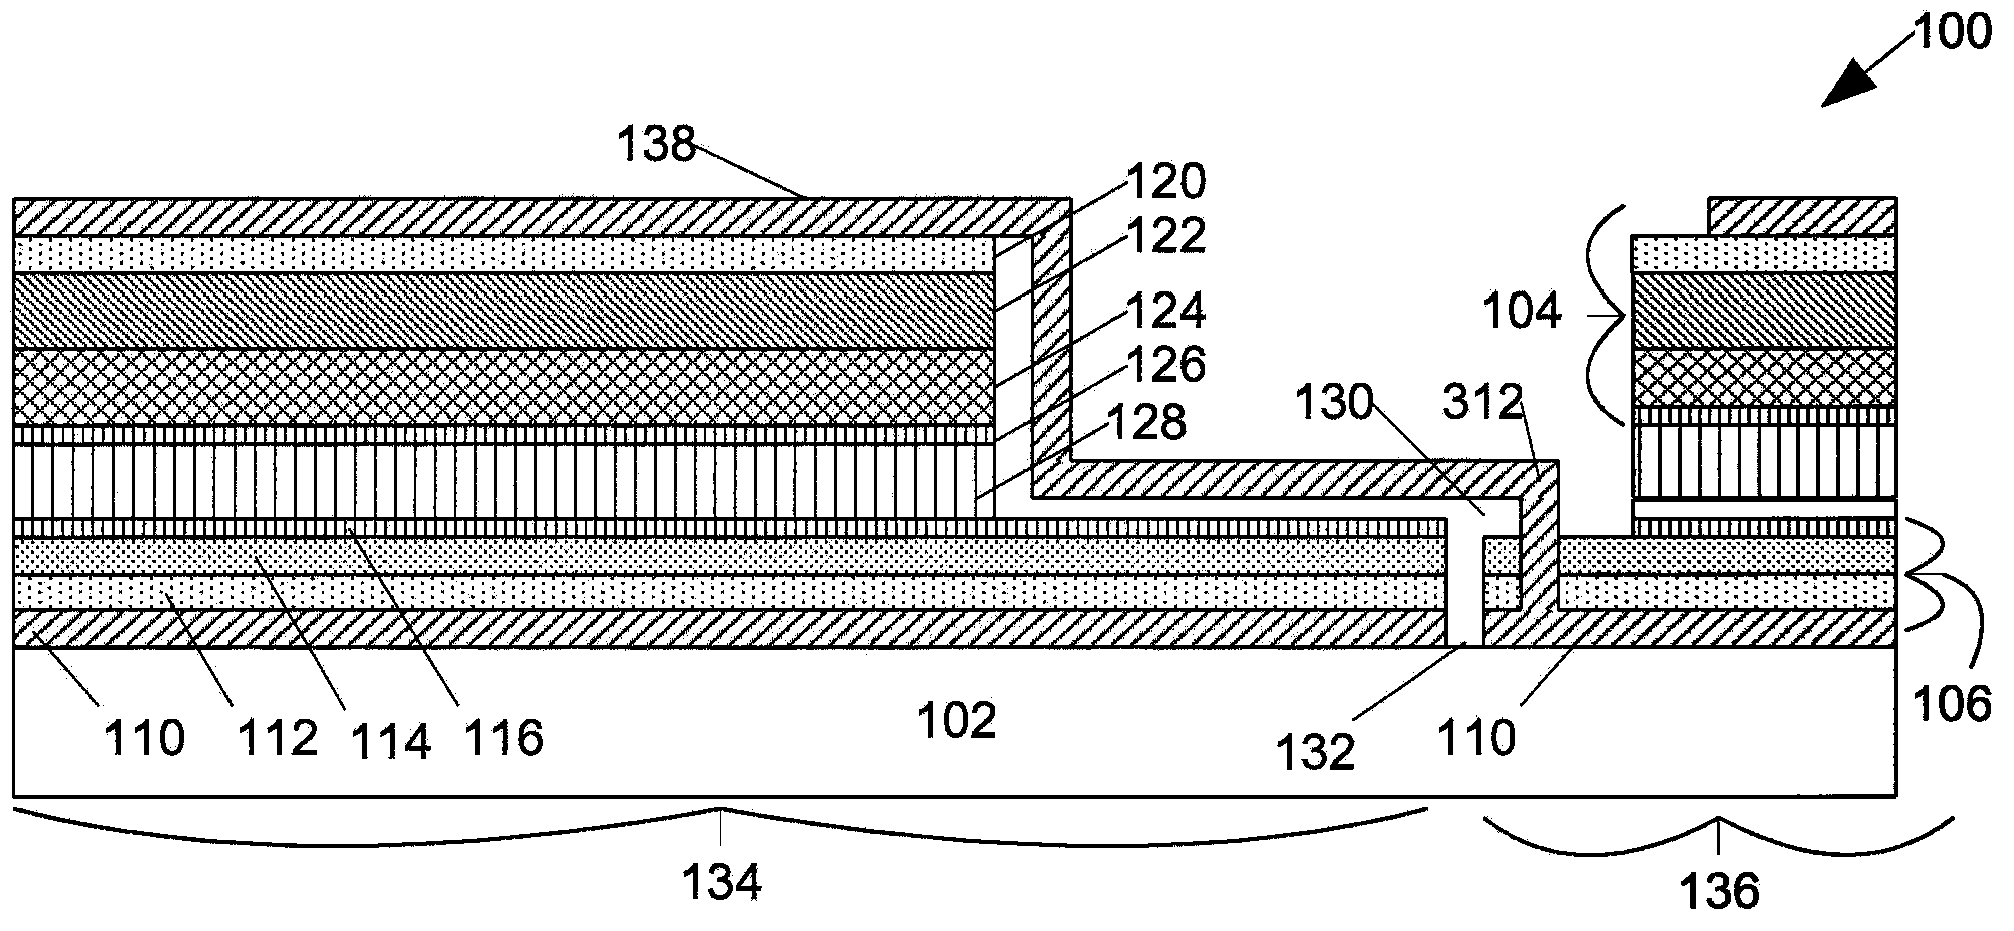 Apparatus and method for hybrid photovoltaic device having multiple, stacked, heterogeneous, semiconductor junctions